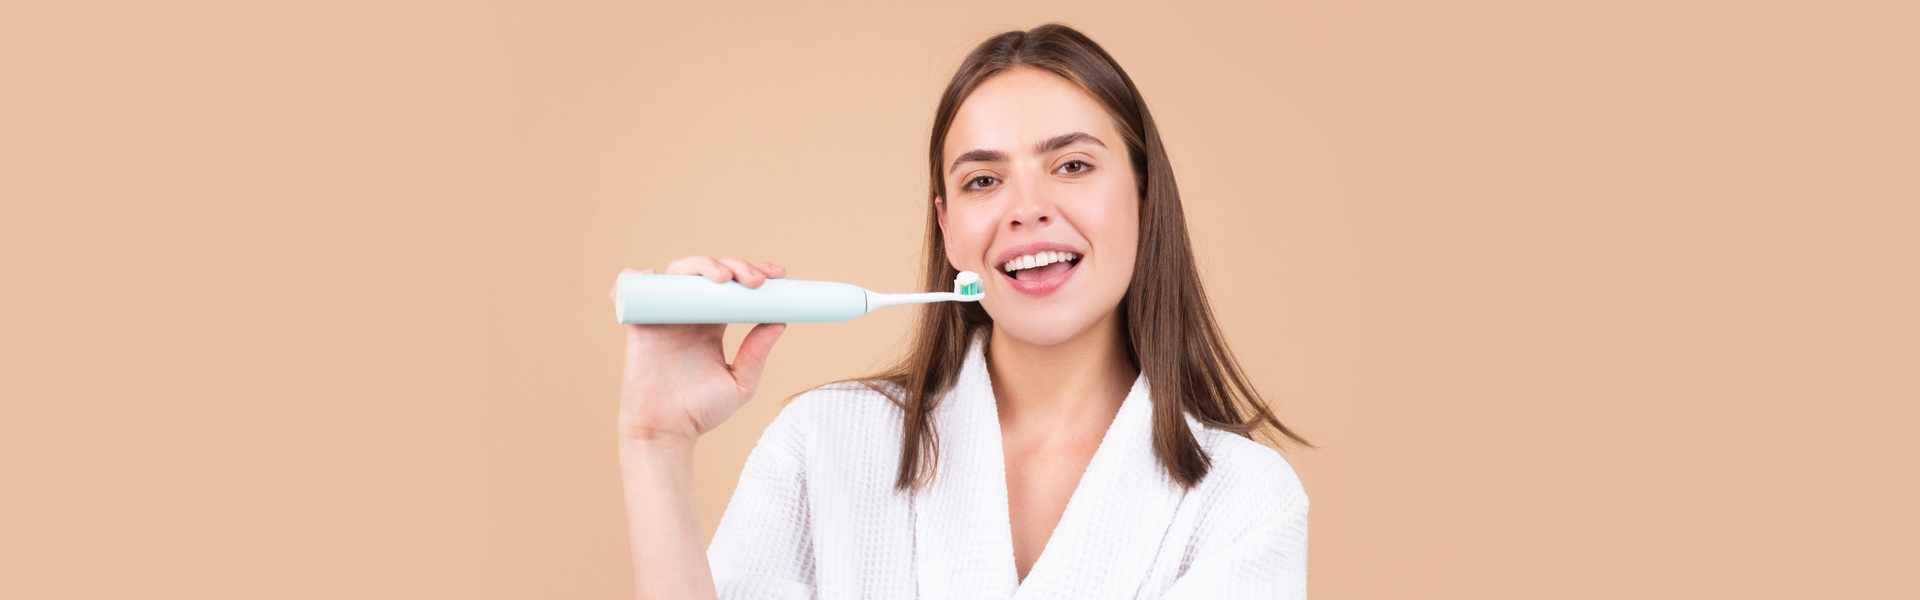 Electric or Manual: Which Toothbrush Is Better?